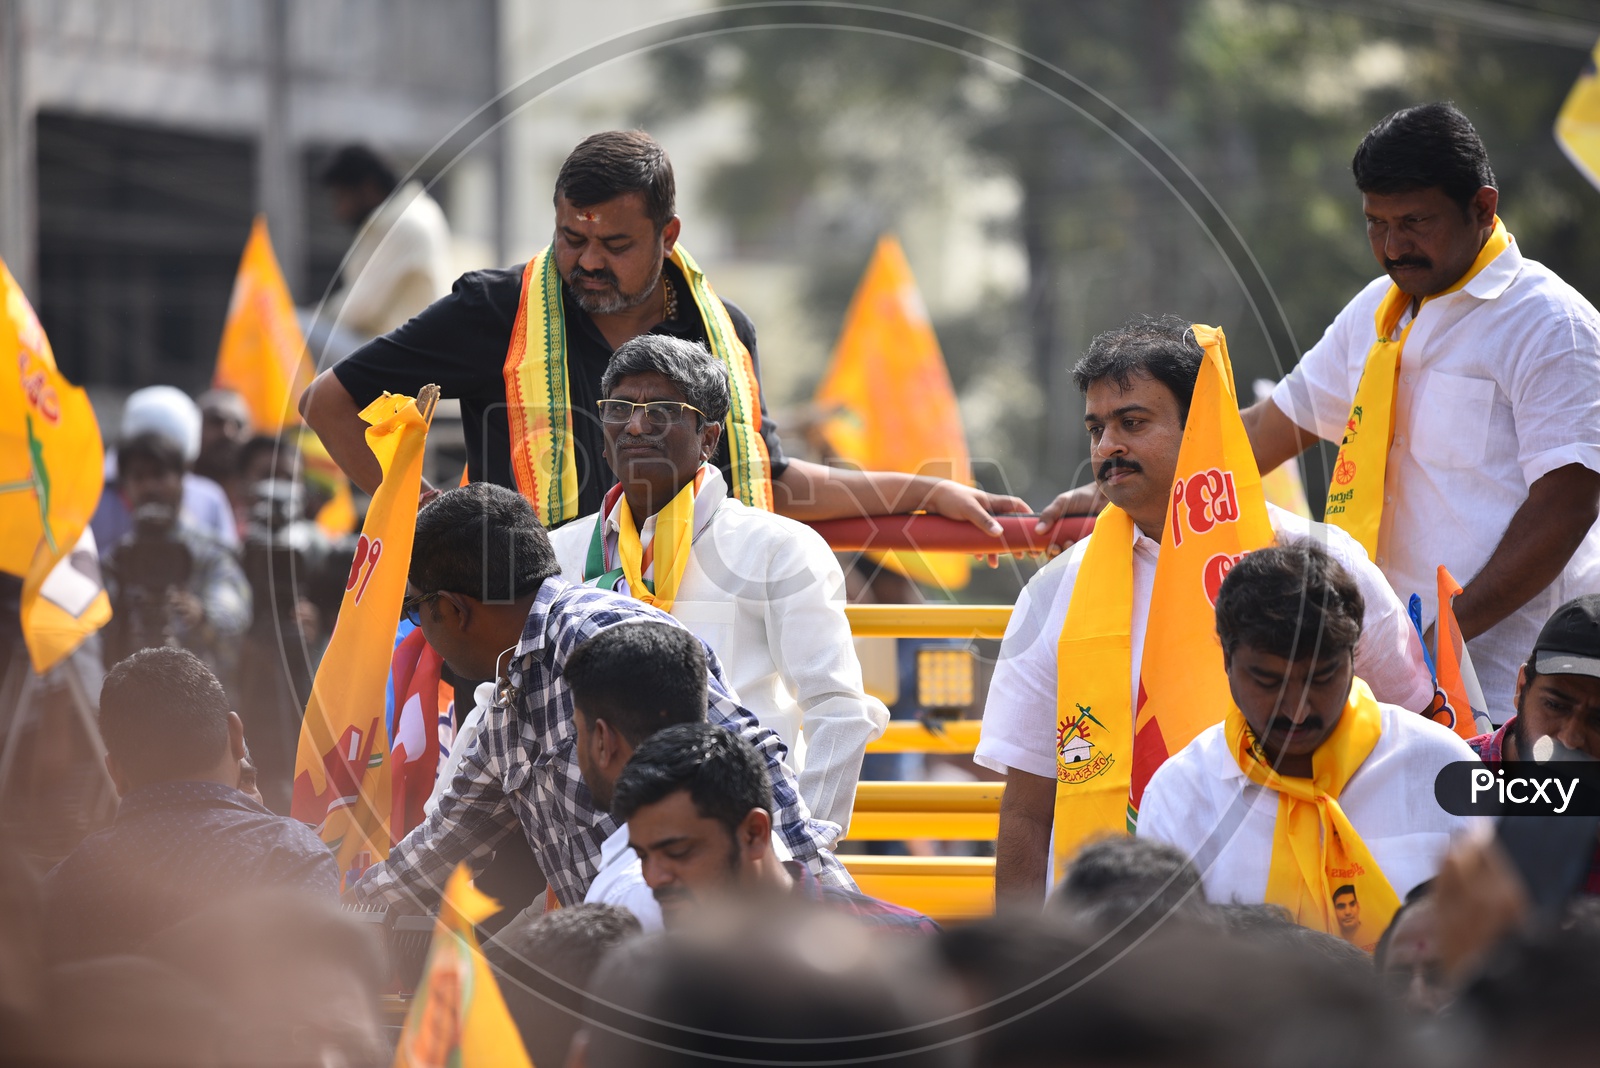 Bhavyas Anand Prasad Telangana TDP MLA Candidate For Serilingampally Constituency  in a Road Show As a Part of Election Campaign  For Telangana General Elections 2018